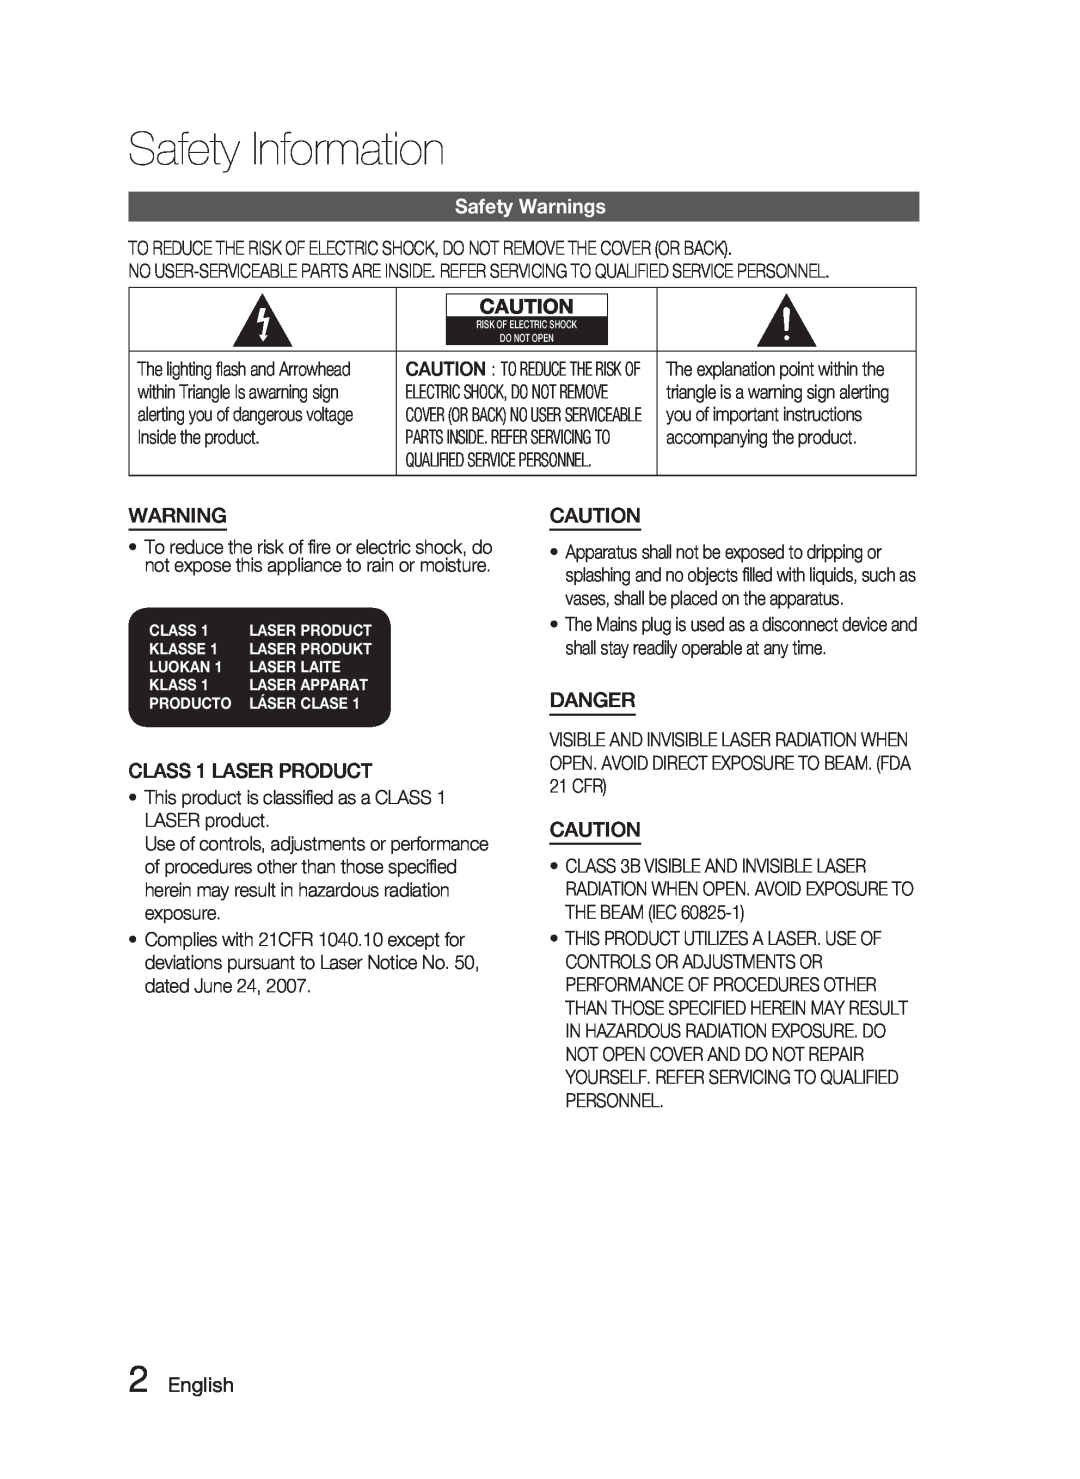 Samsung HT-C6900W user manual Safety Information, Safety Warnings, CLASS 1 LASER PRODUCT, Danger, English 